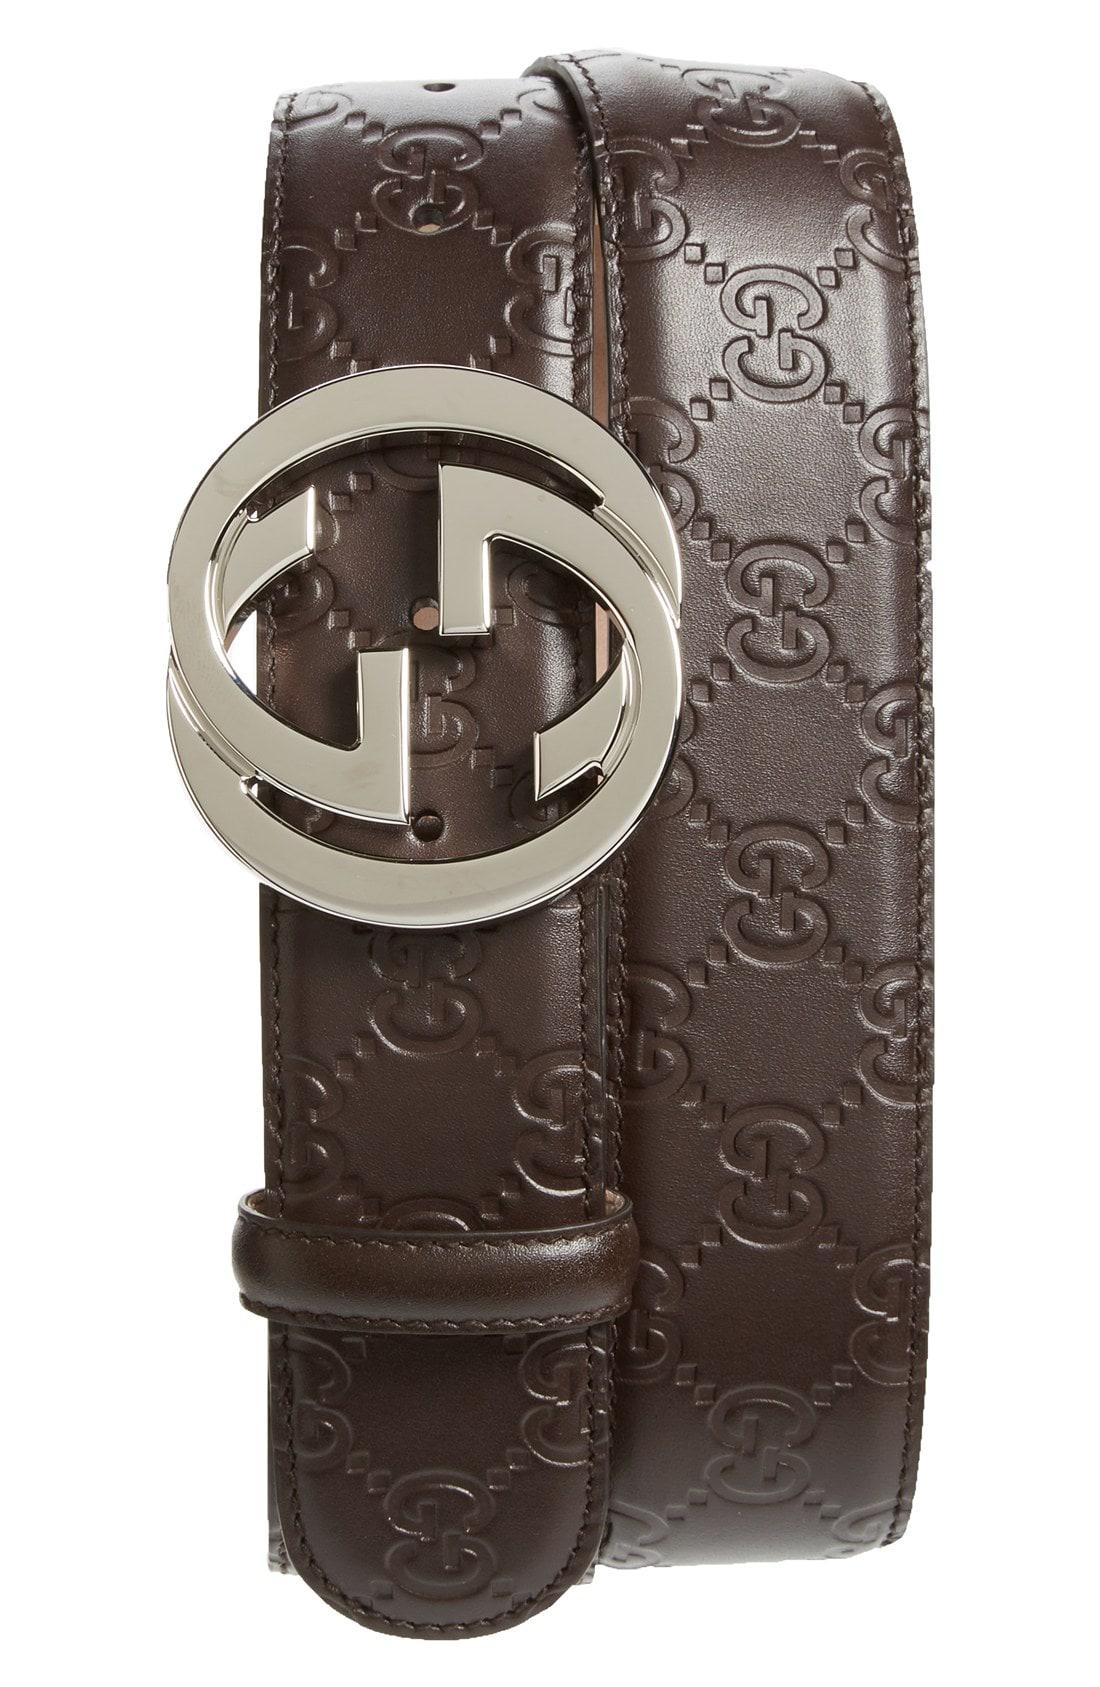 Lyst - Gucci Logo Embossed Leather Belt in Brown for Men